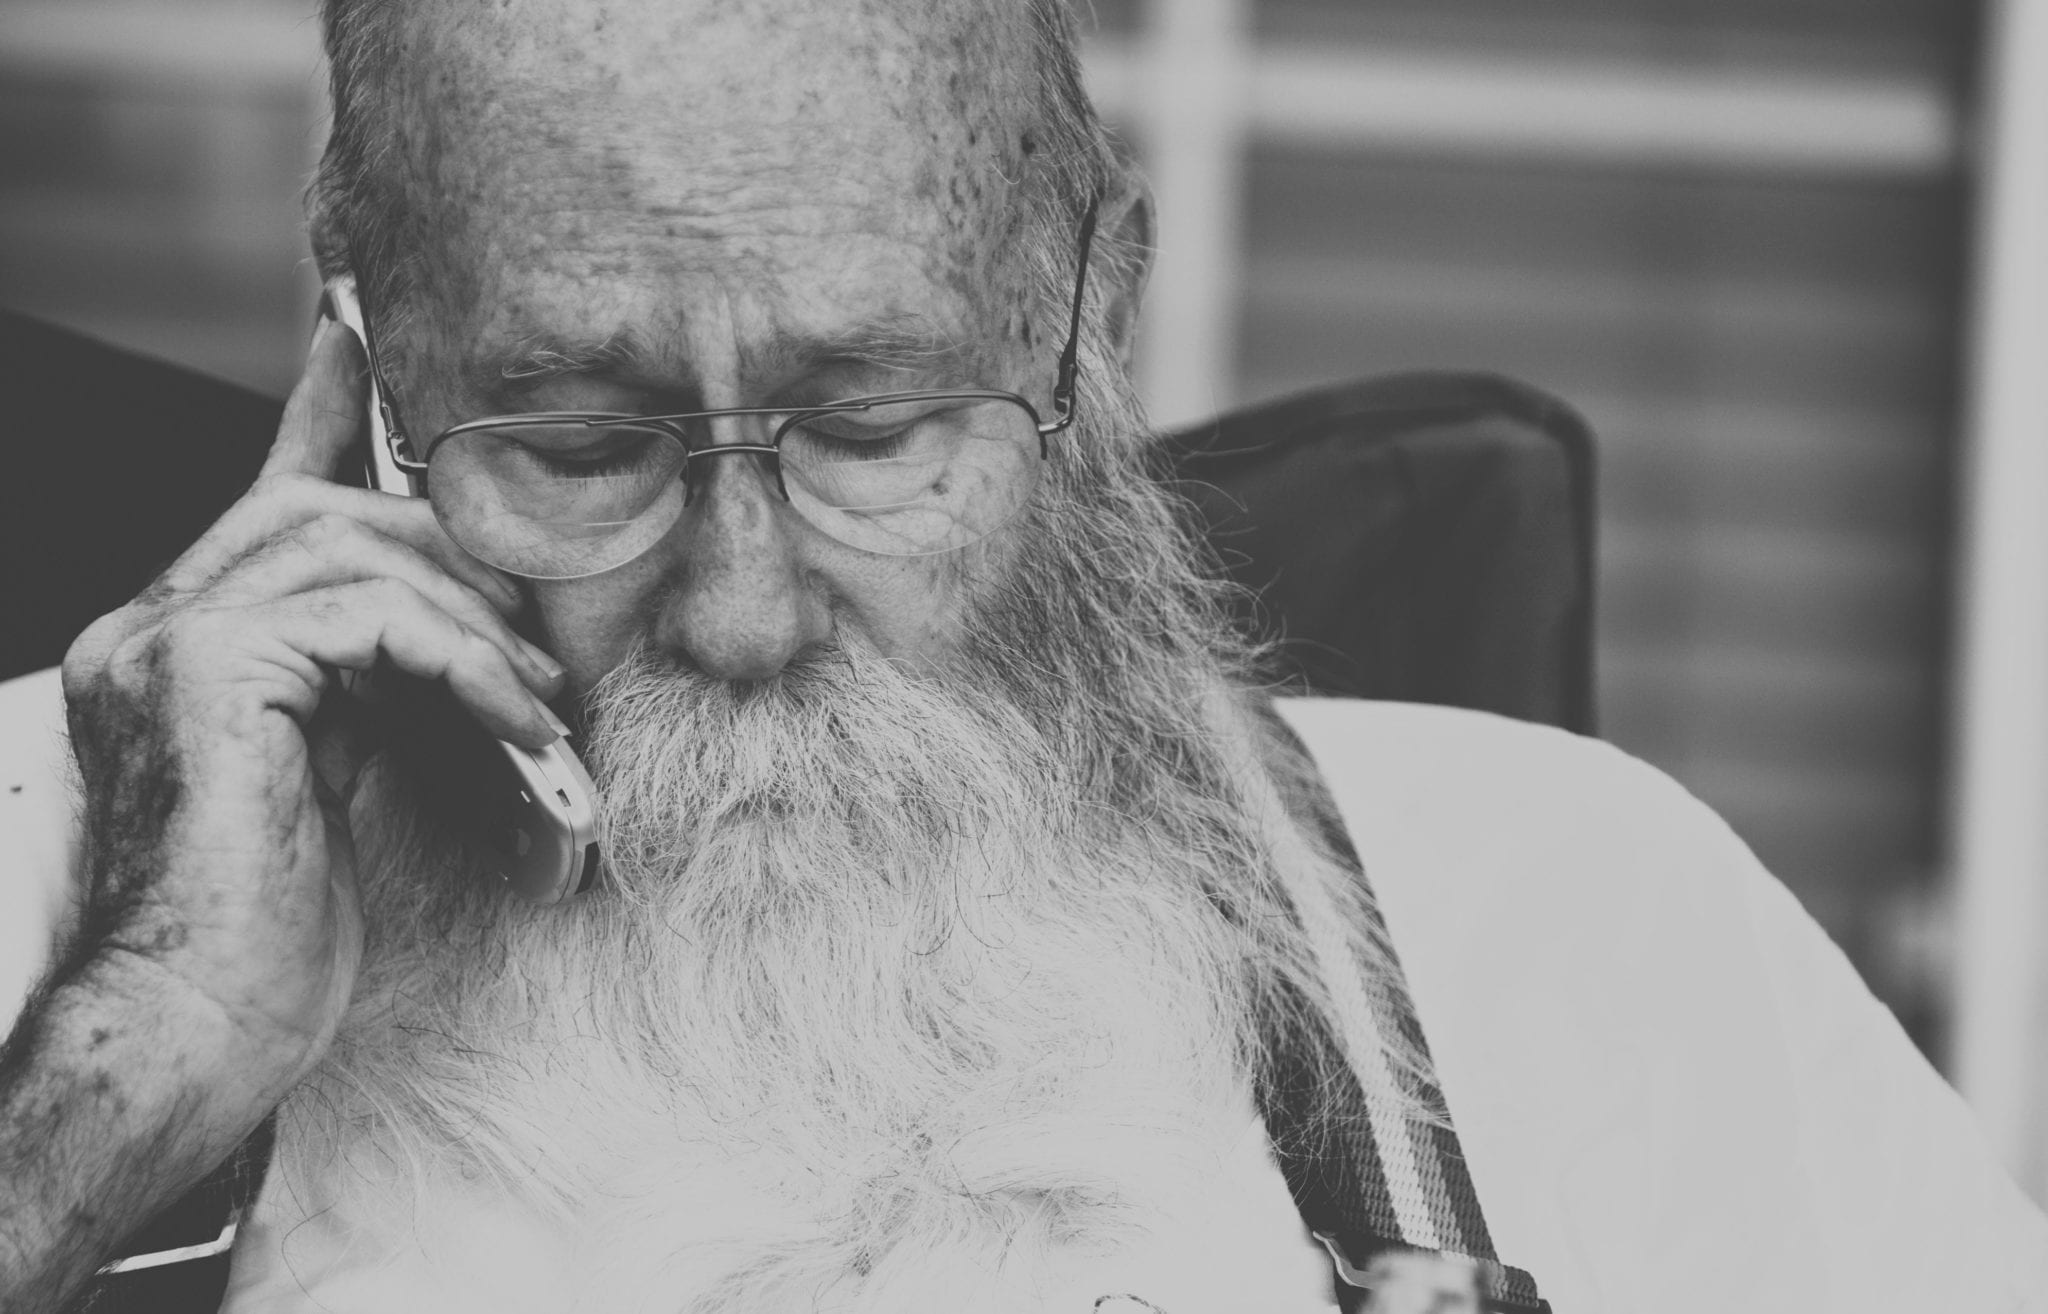 An older man with a beard and glasses talks on the phone